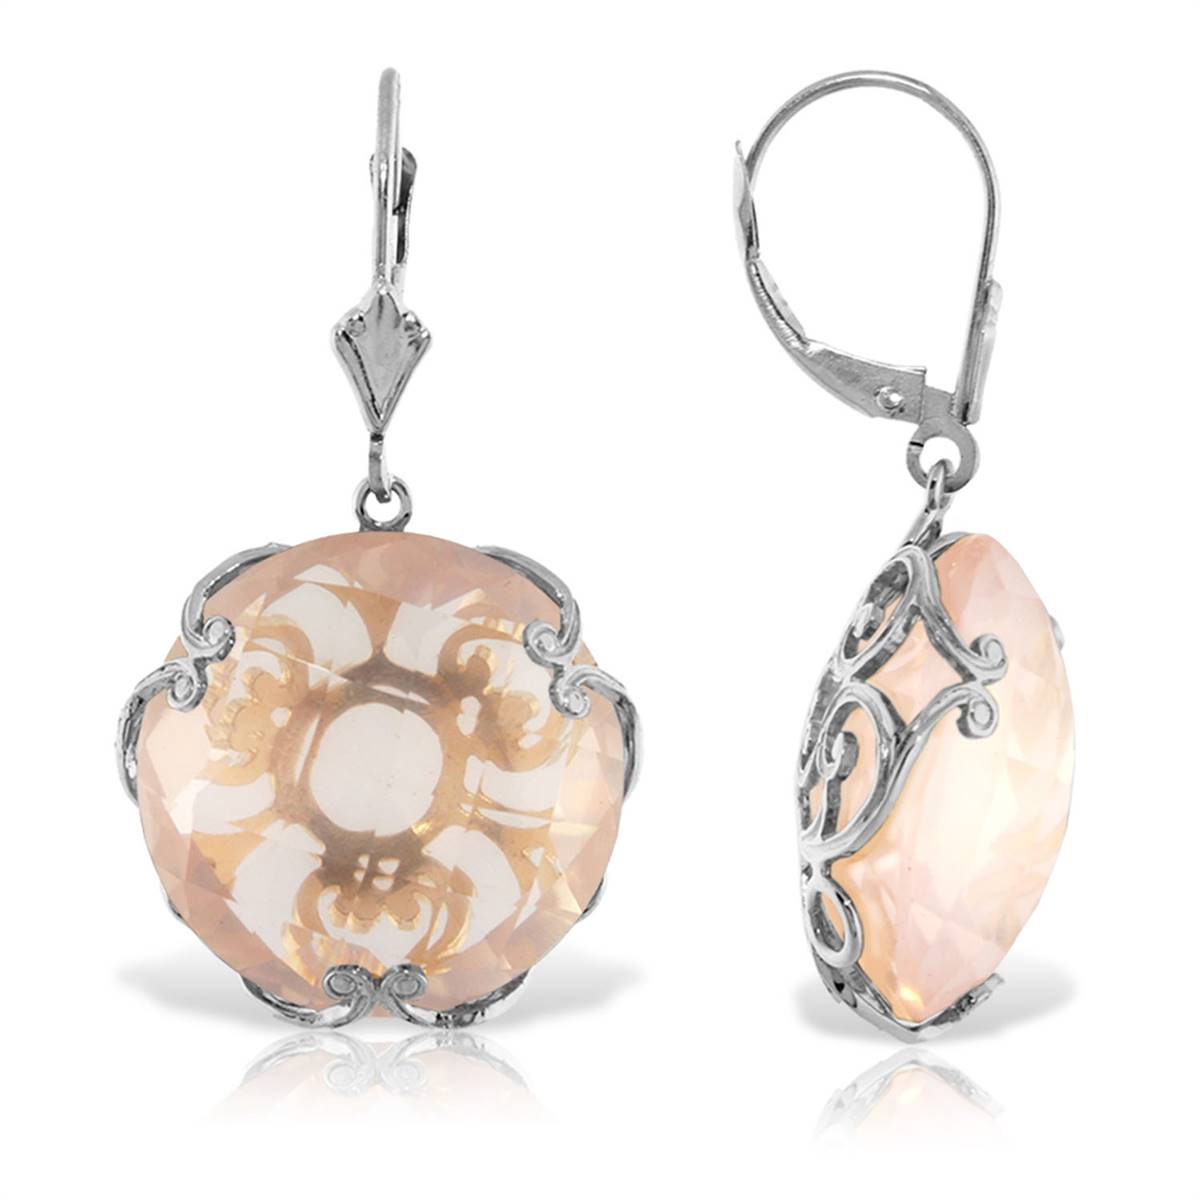 14K Solid White Gold Leverback Earrings Round Rose Quartz Jewelry